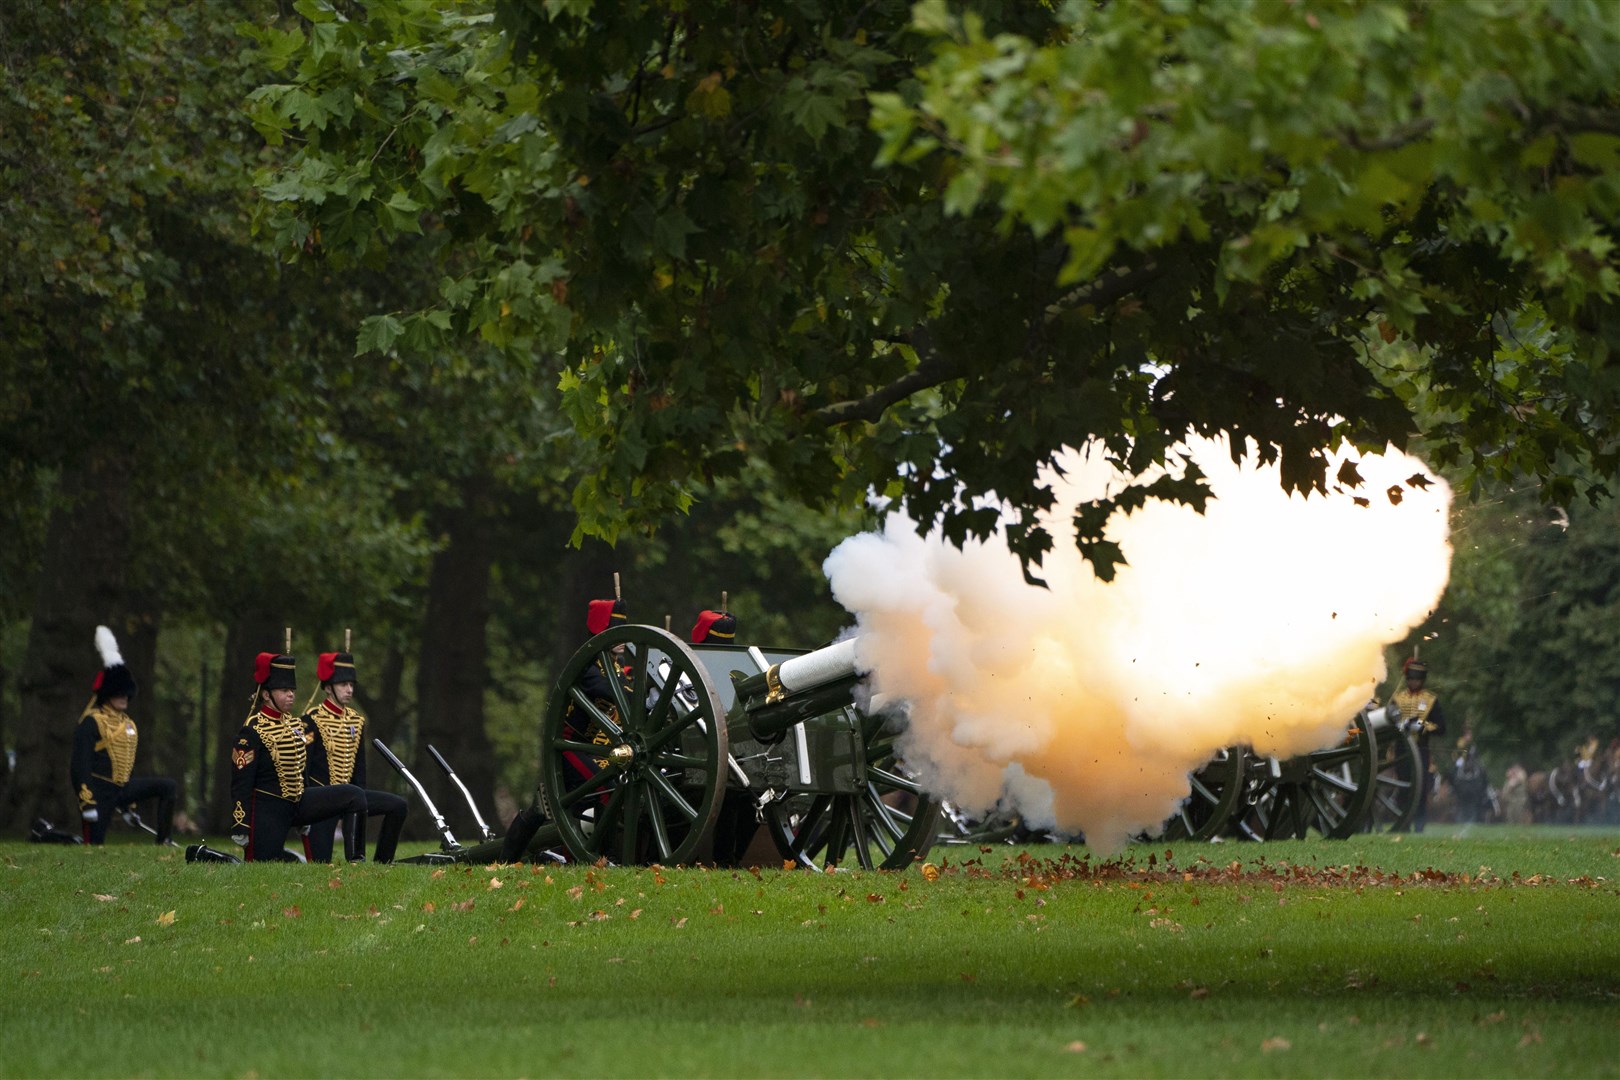 Members of The King’s Troop Royal Horse Artillery during the Gun Salute at London’s Hyde Park (Kirsty O’Connor”/PA)